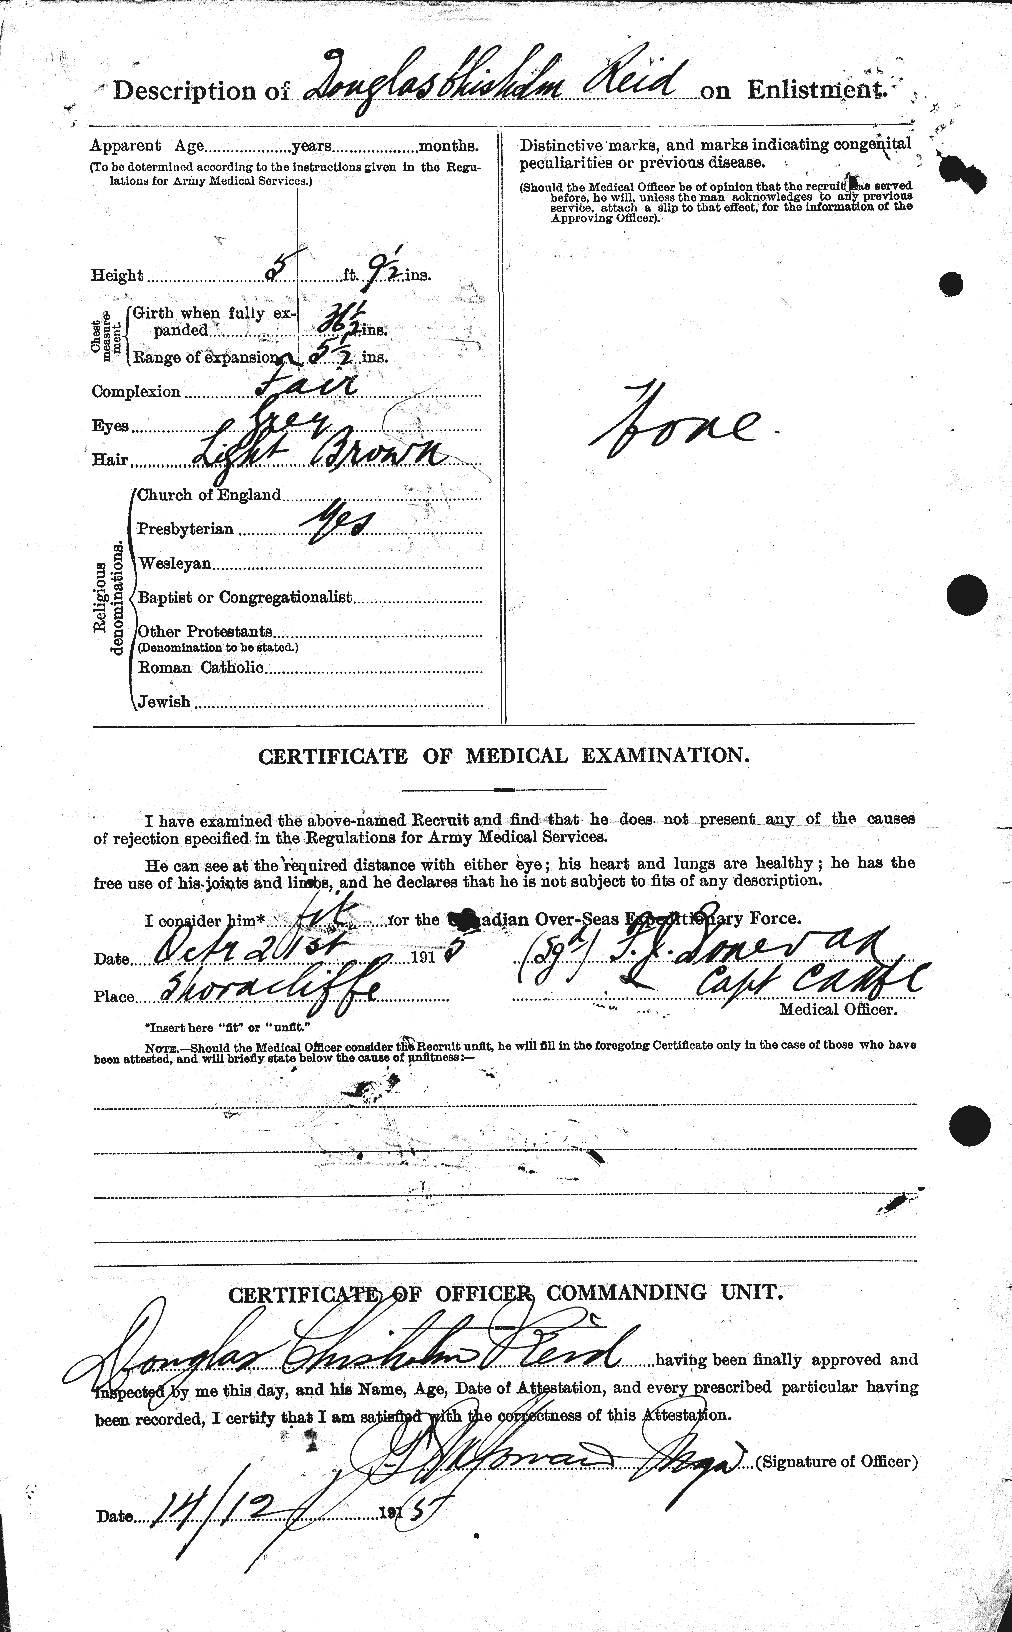 Personnel Records of the First World War - CEF 597968b